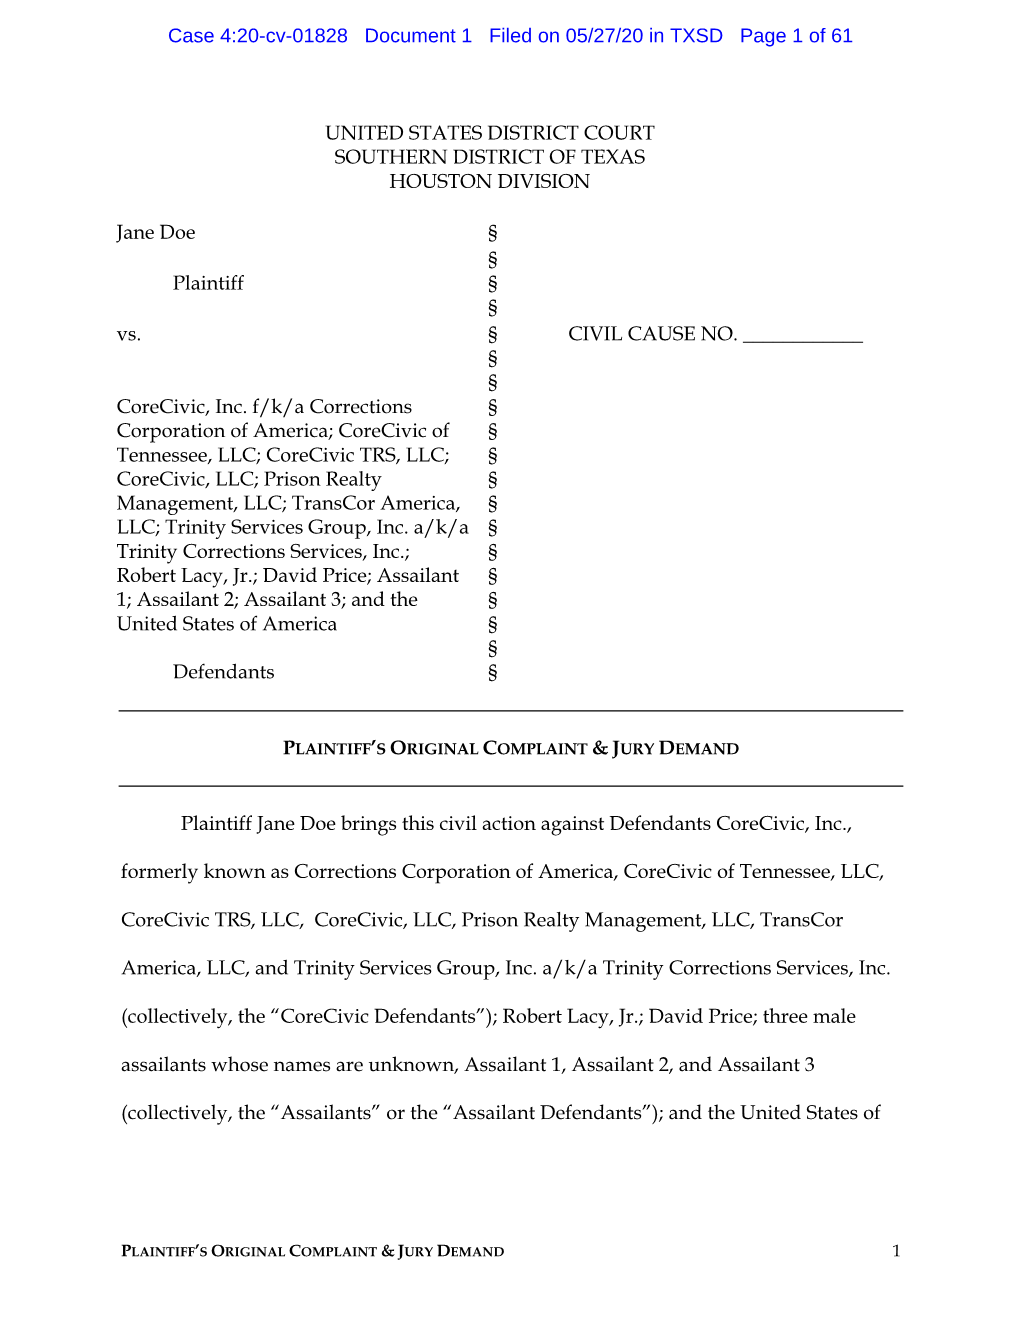 Case 4:20-Cv-01828 Document 1 Filed on 05/27/20 in TXSD Page 1 of 61